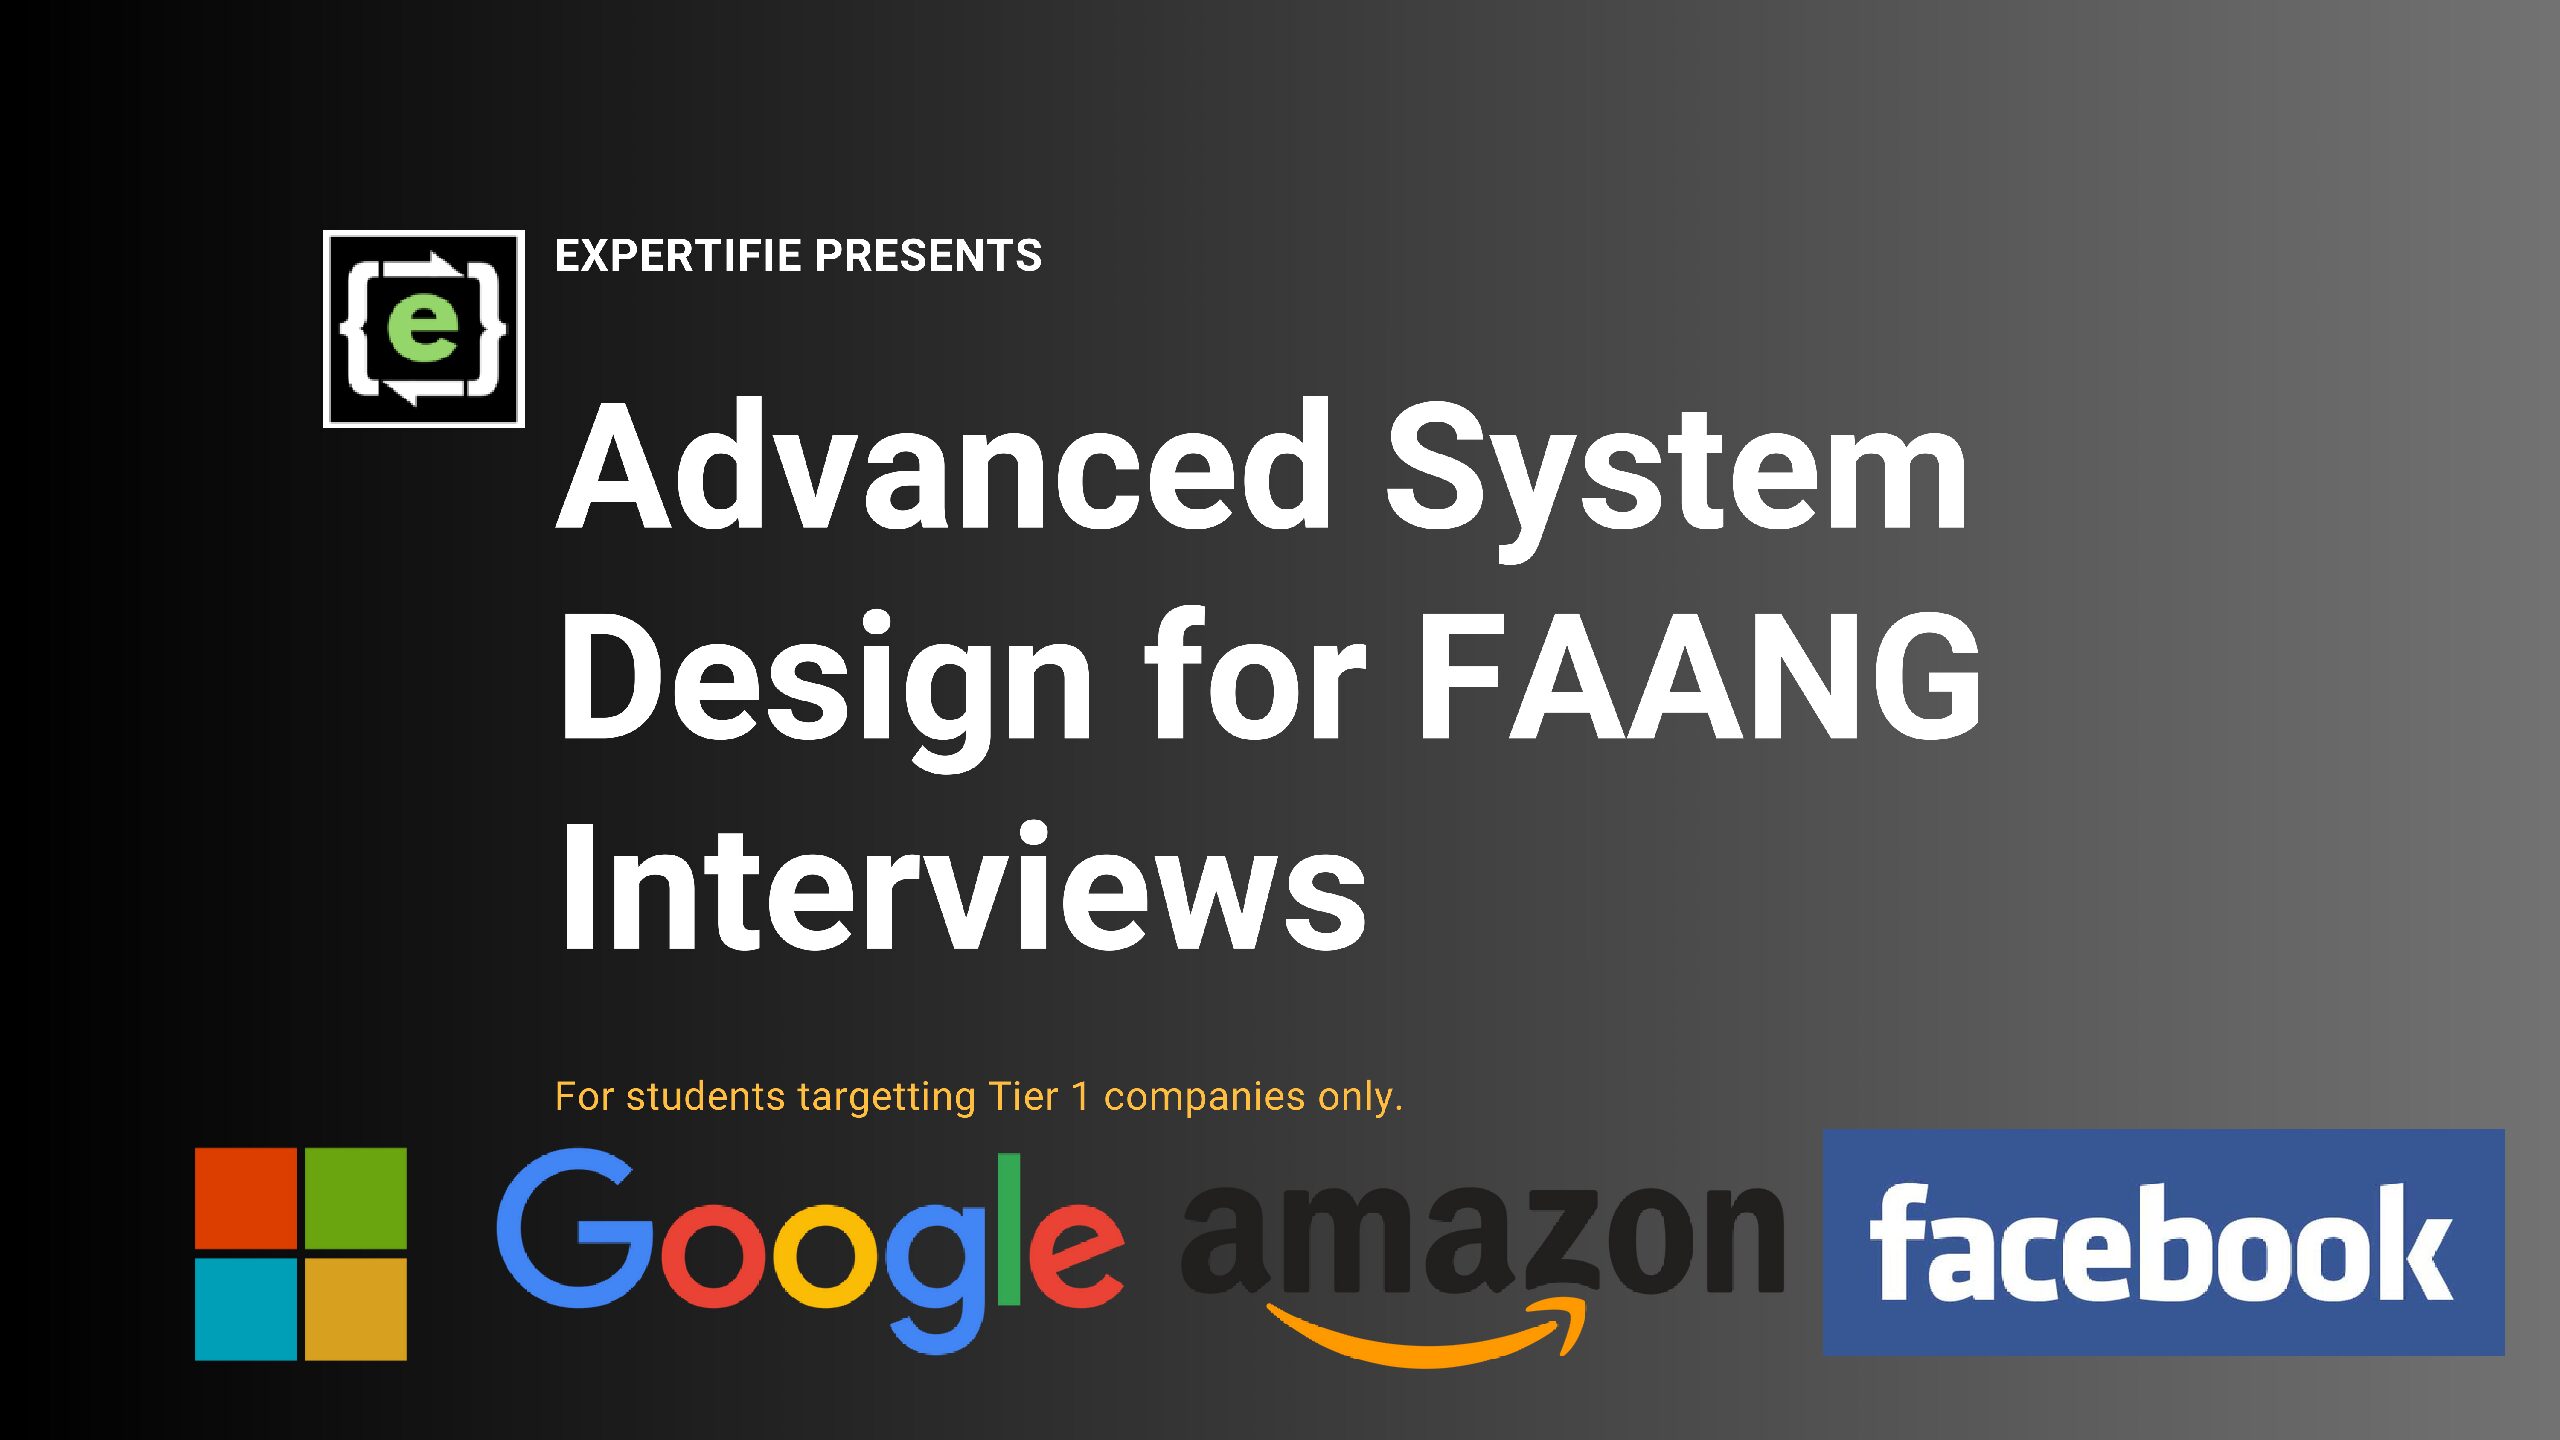 Advanced Software System Design With Projects for FAANG Interviews